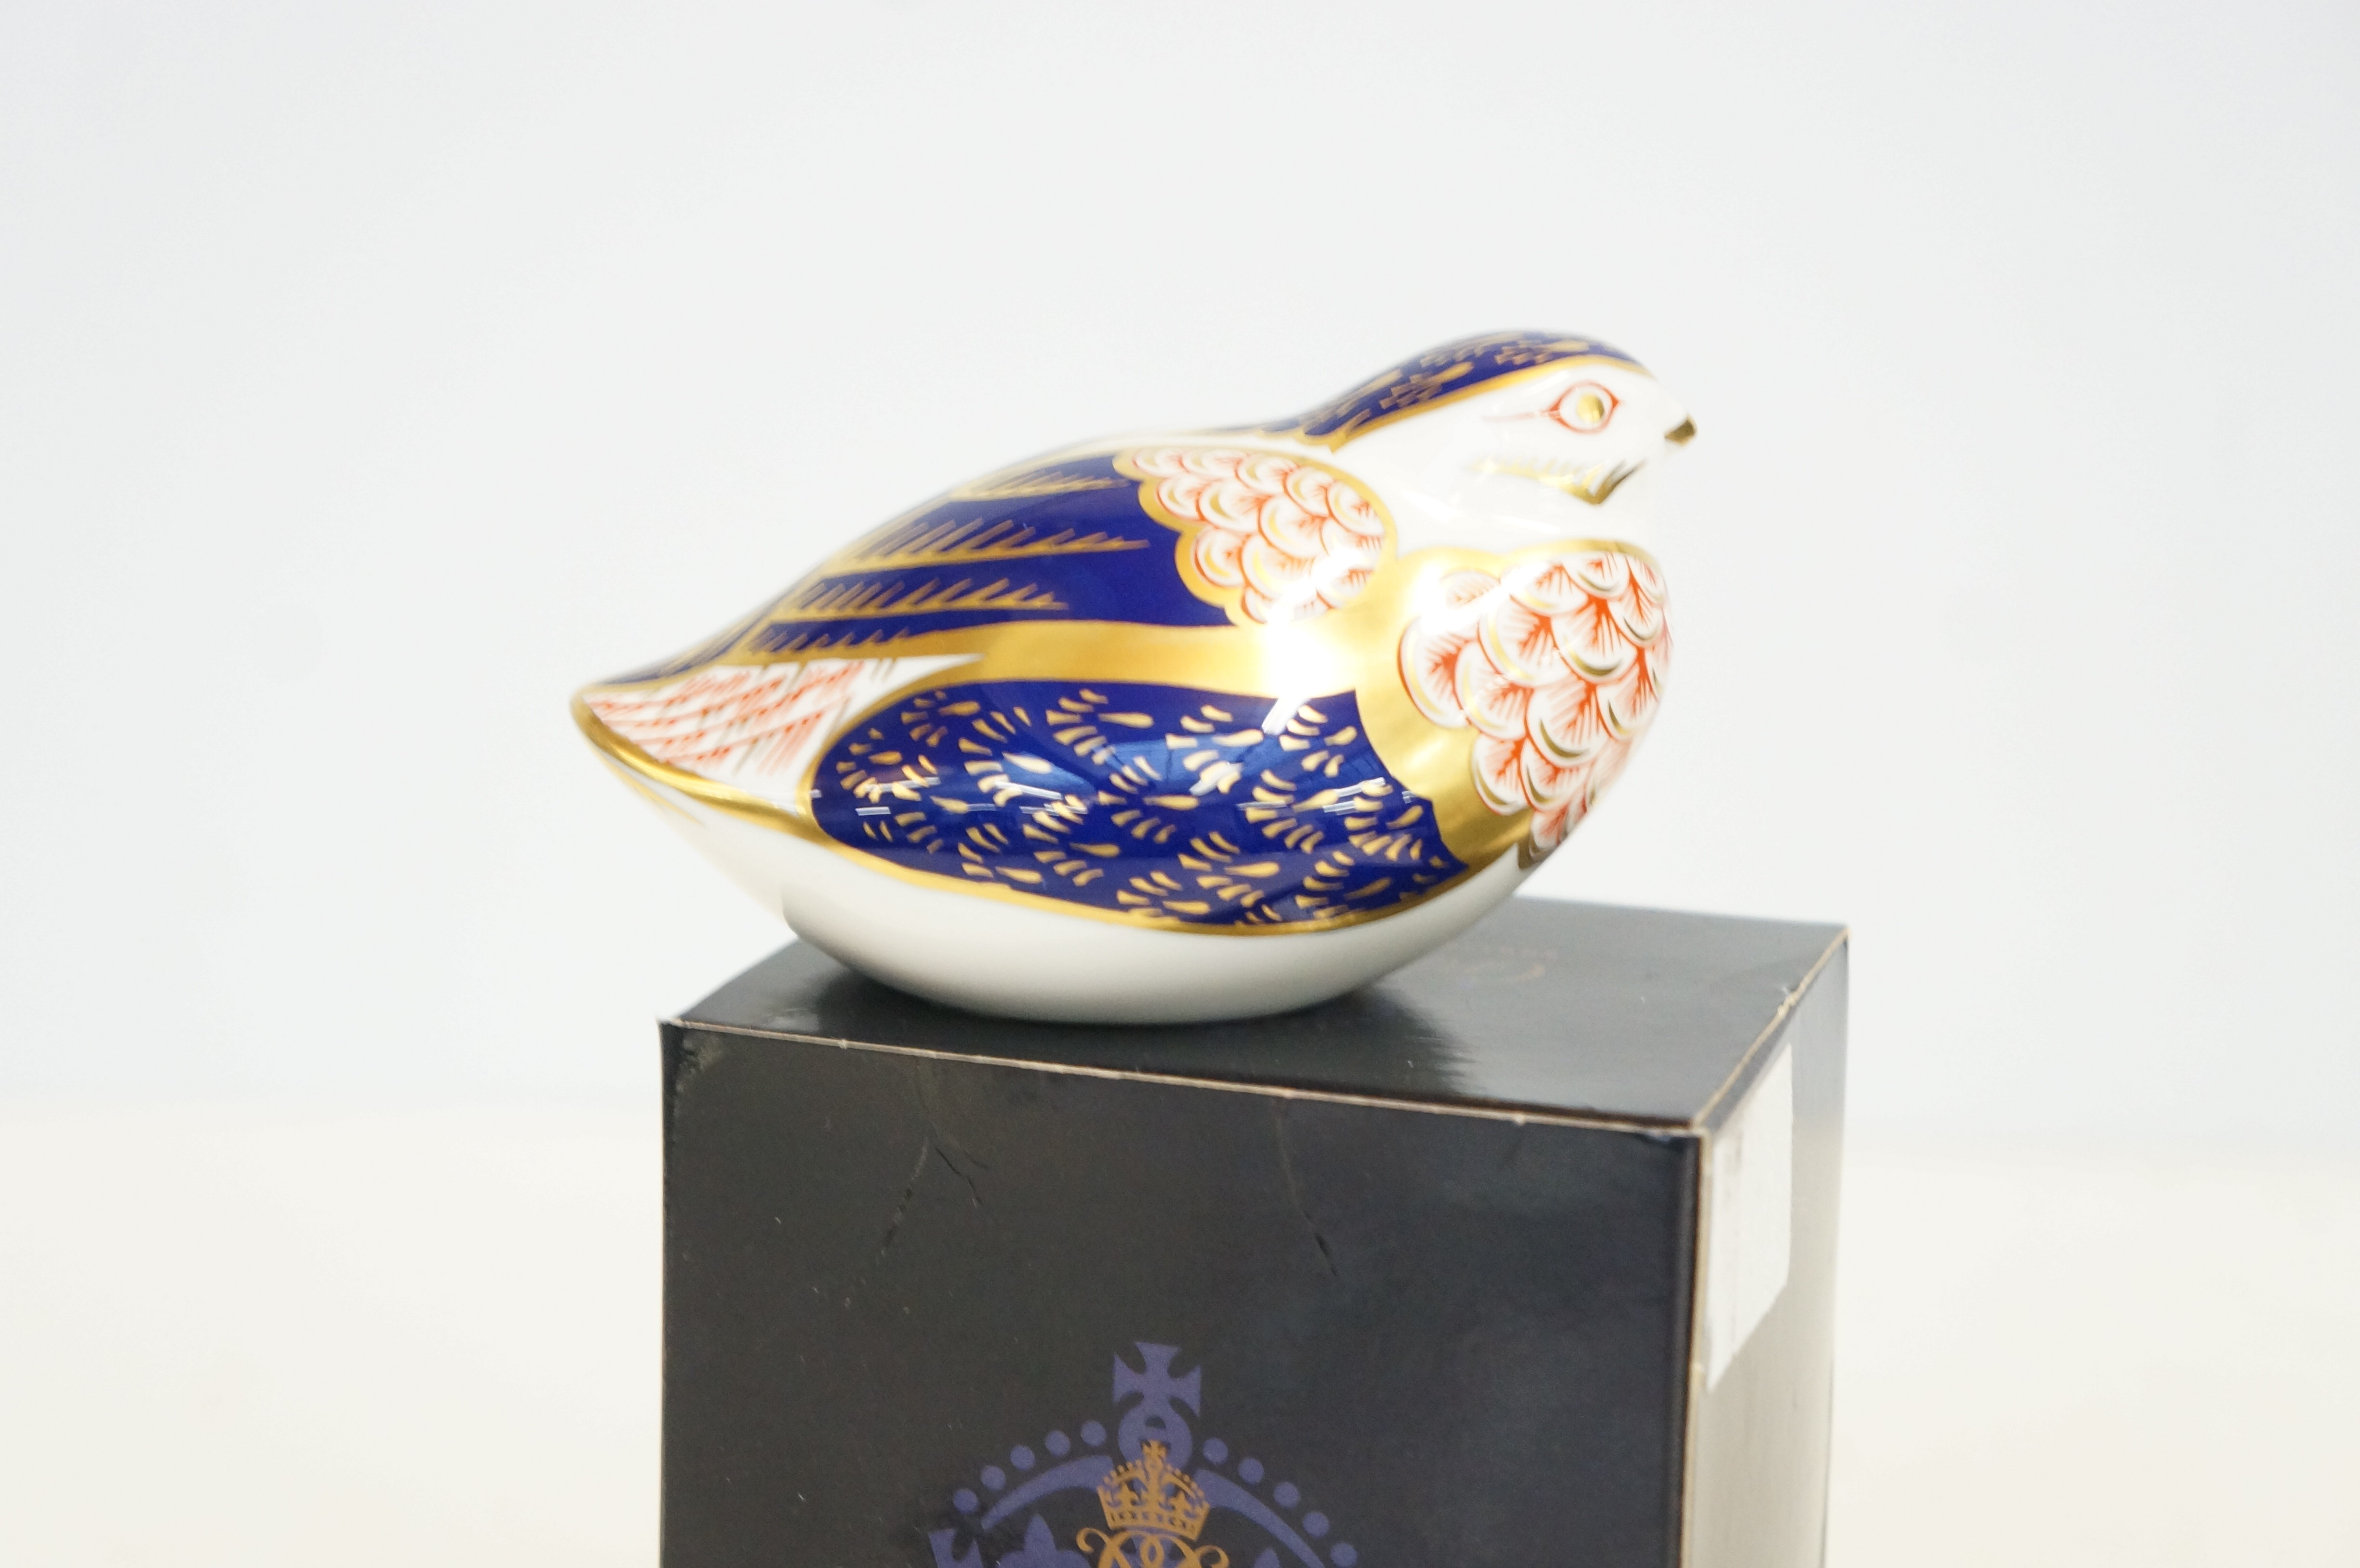 Royal crown derby boxed quail with gold stopper